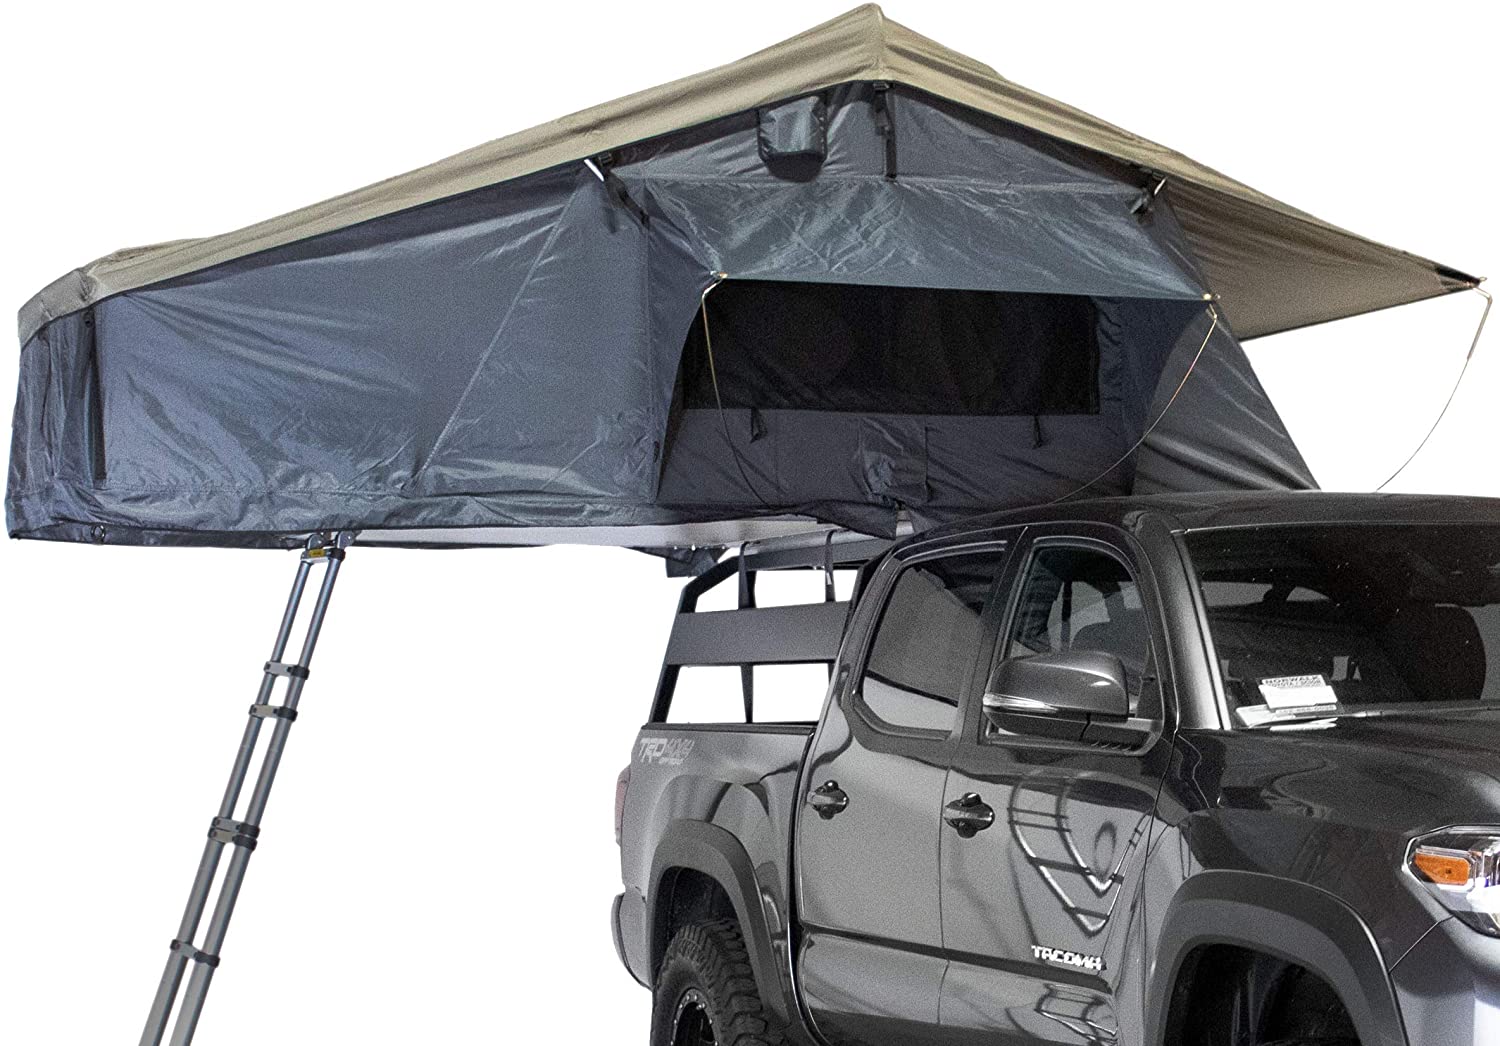 Overland Vehicle Systems Nomadic 3 Extended Car RoofTent